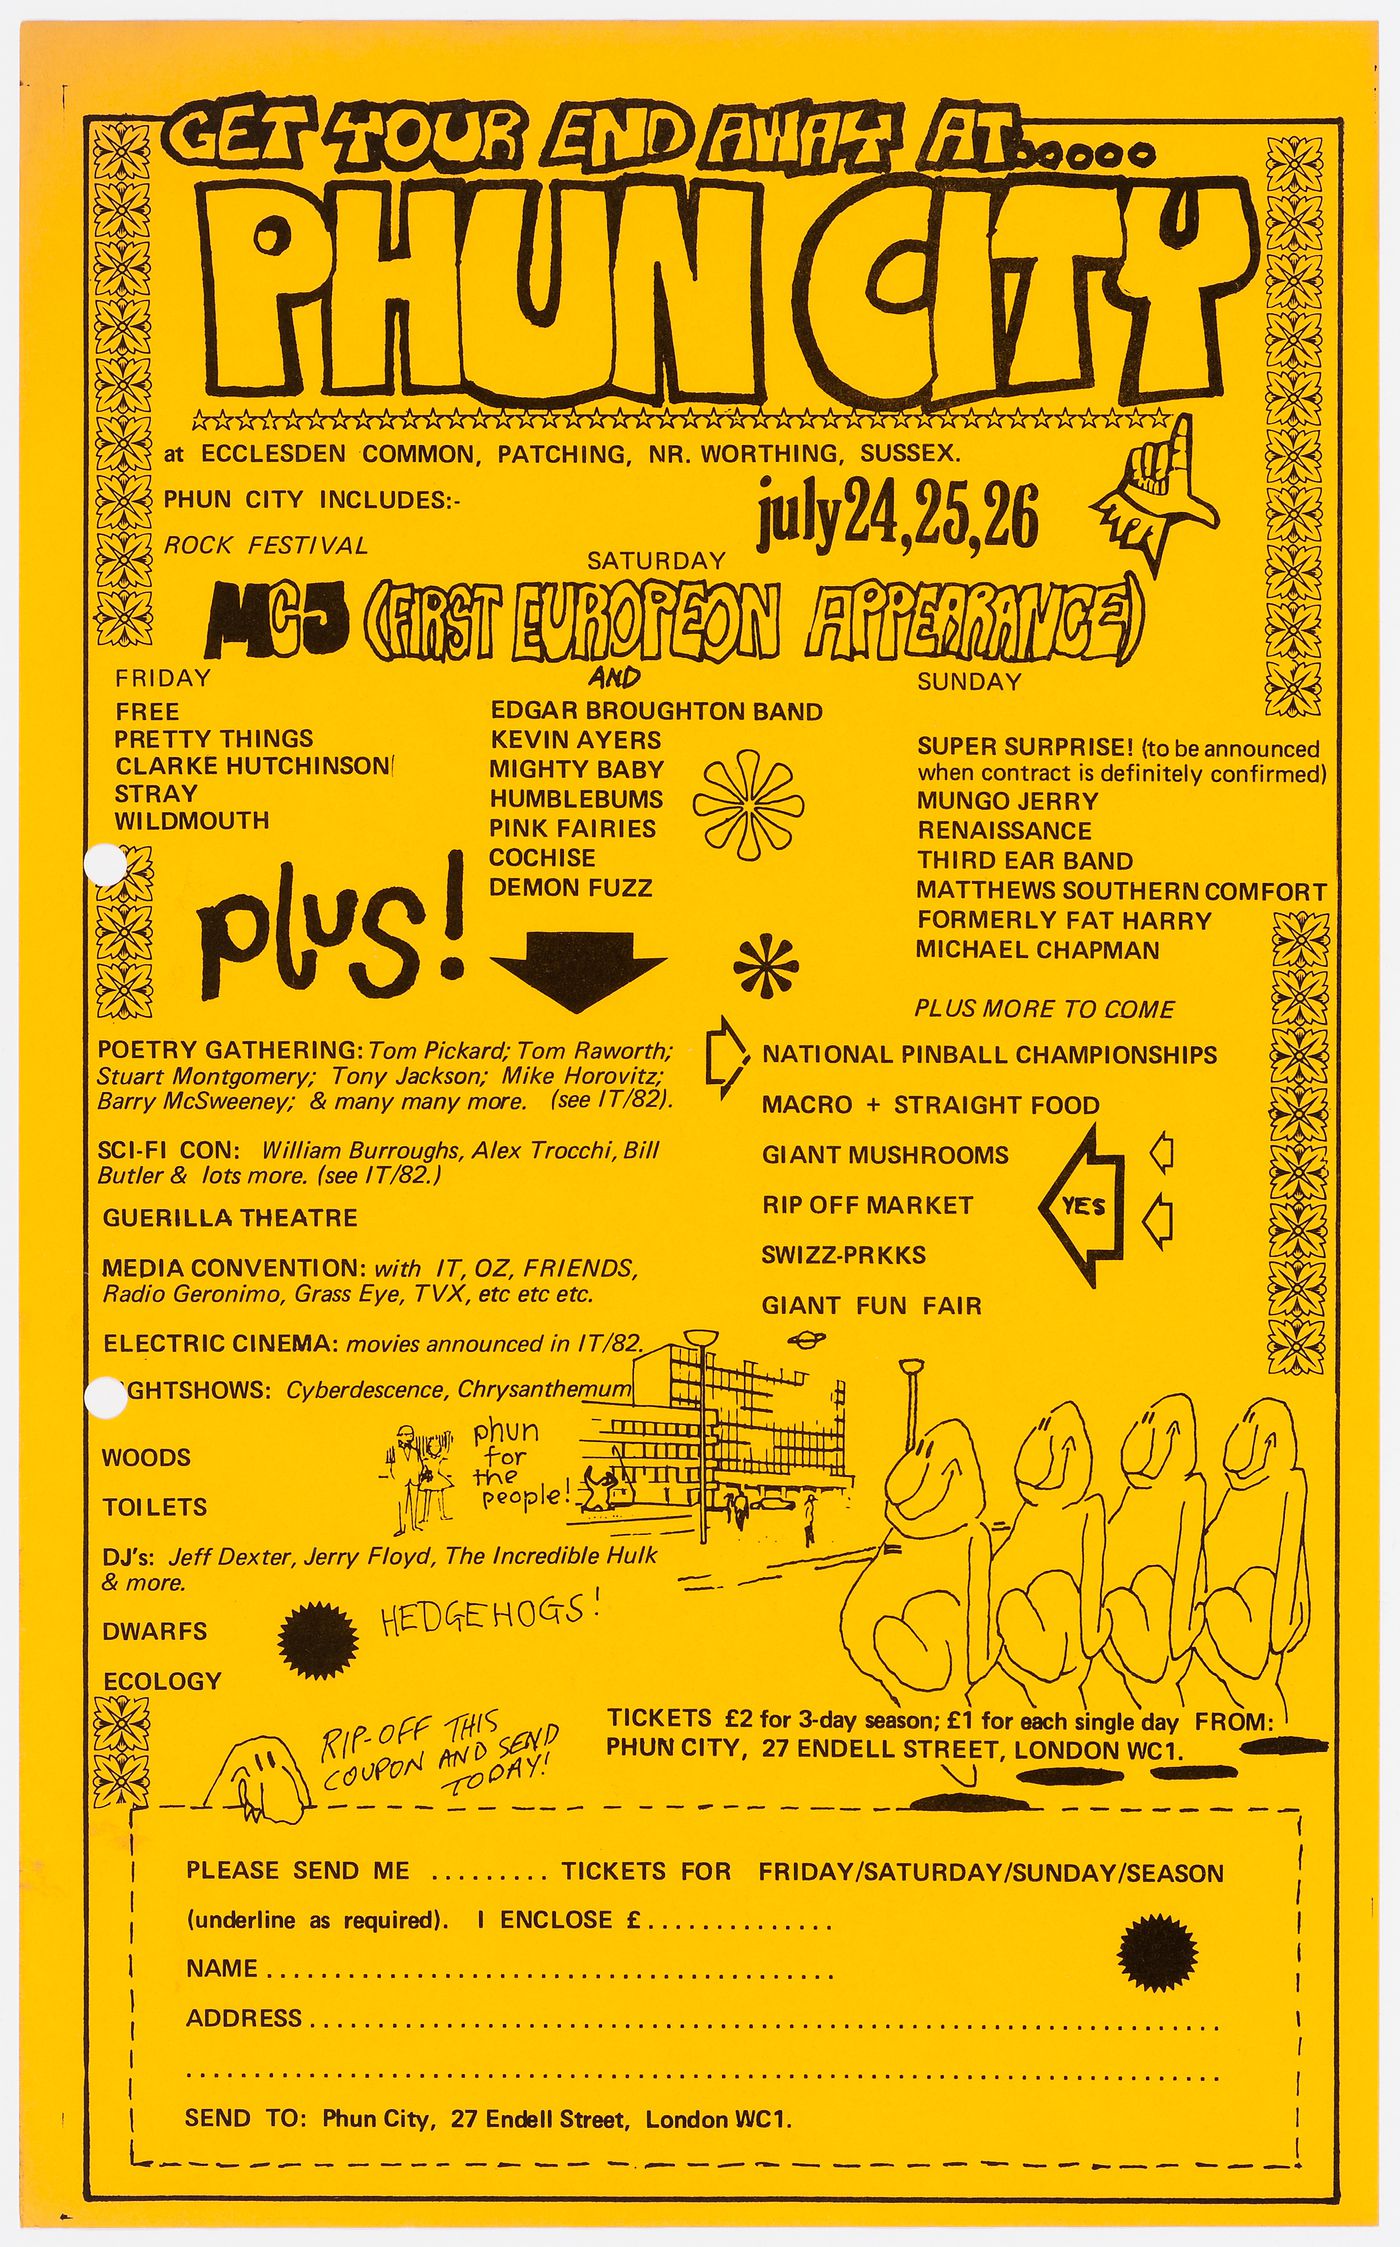 Flyer advertising the Phun City event